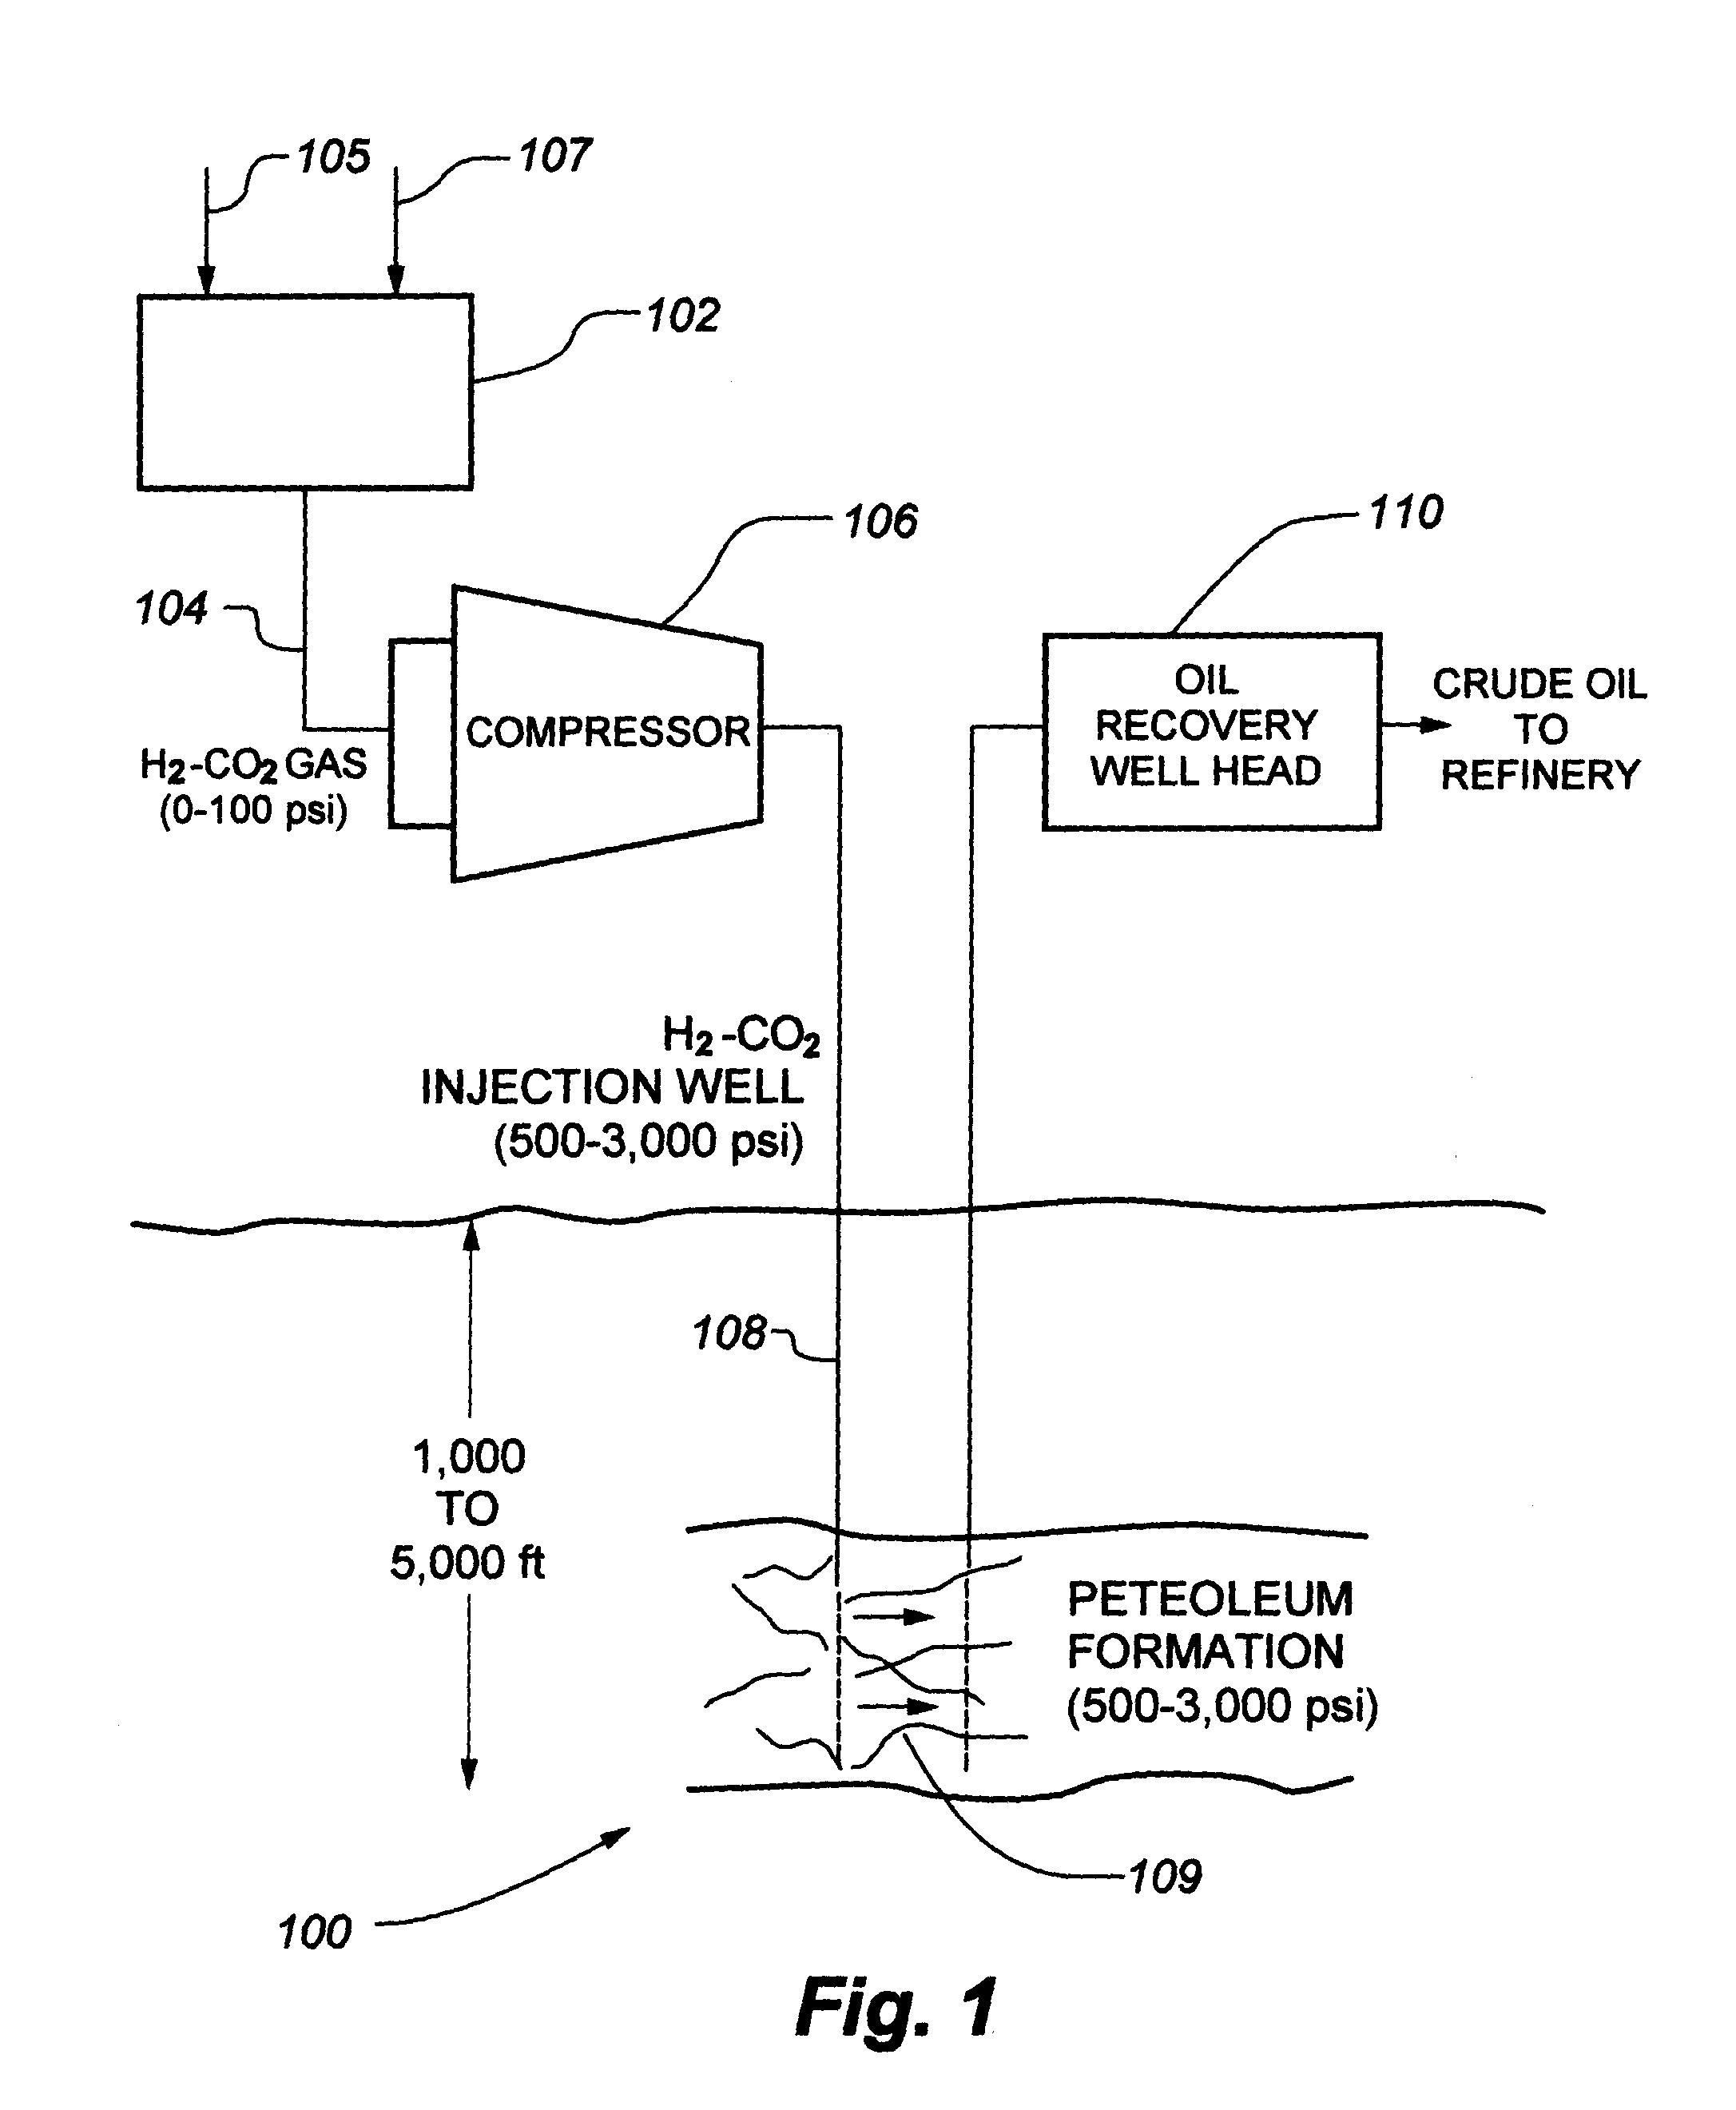 Apparatus and method for extracting petroleum from underground sites using reformed gases